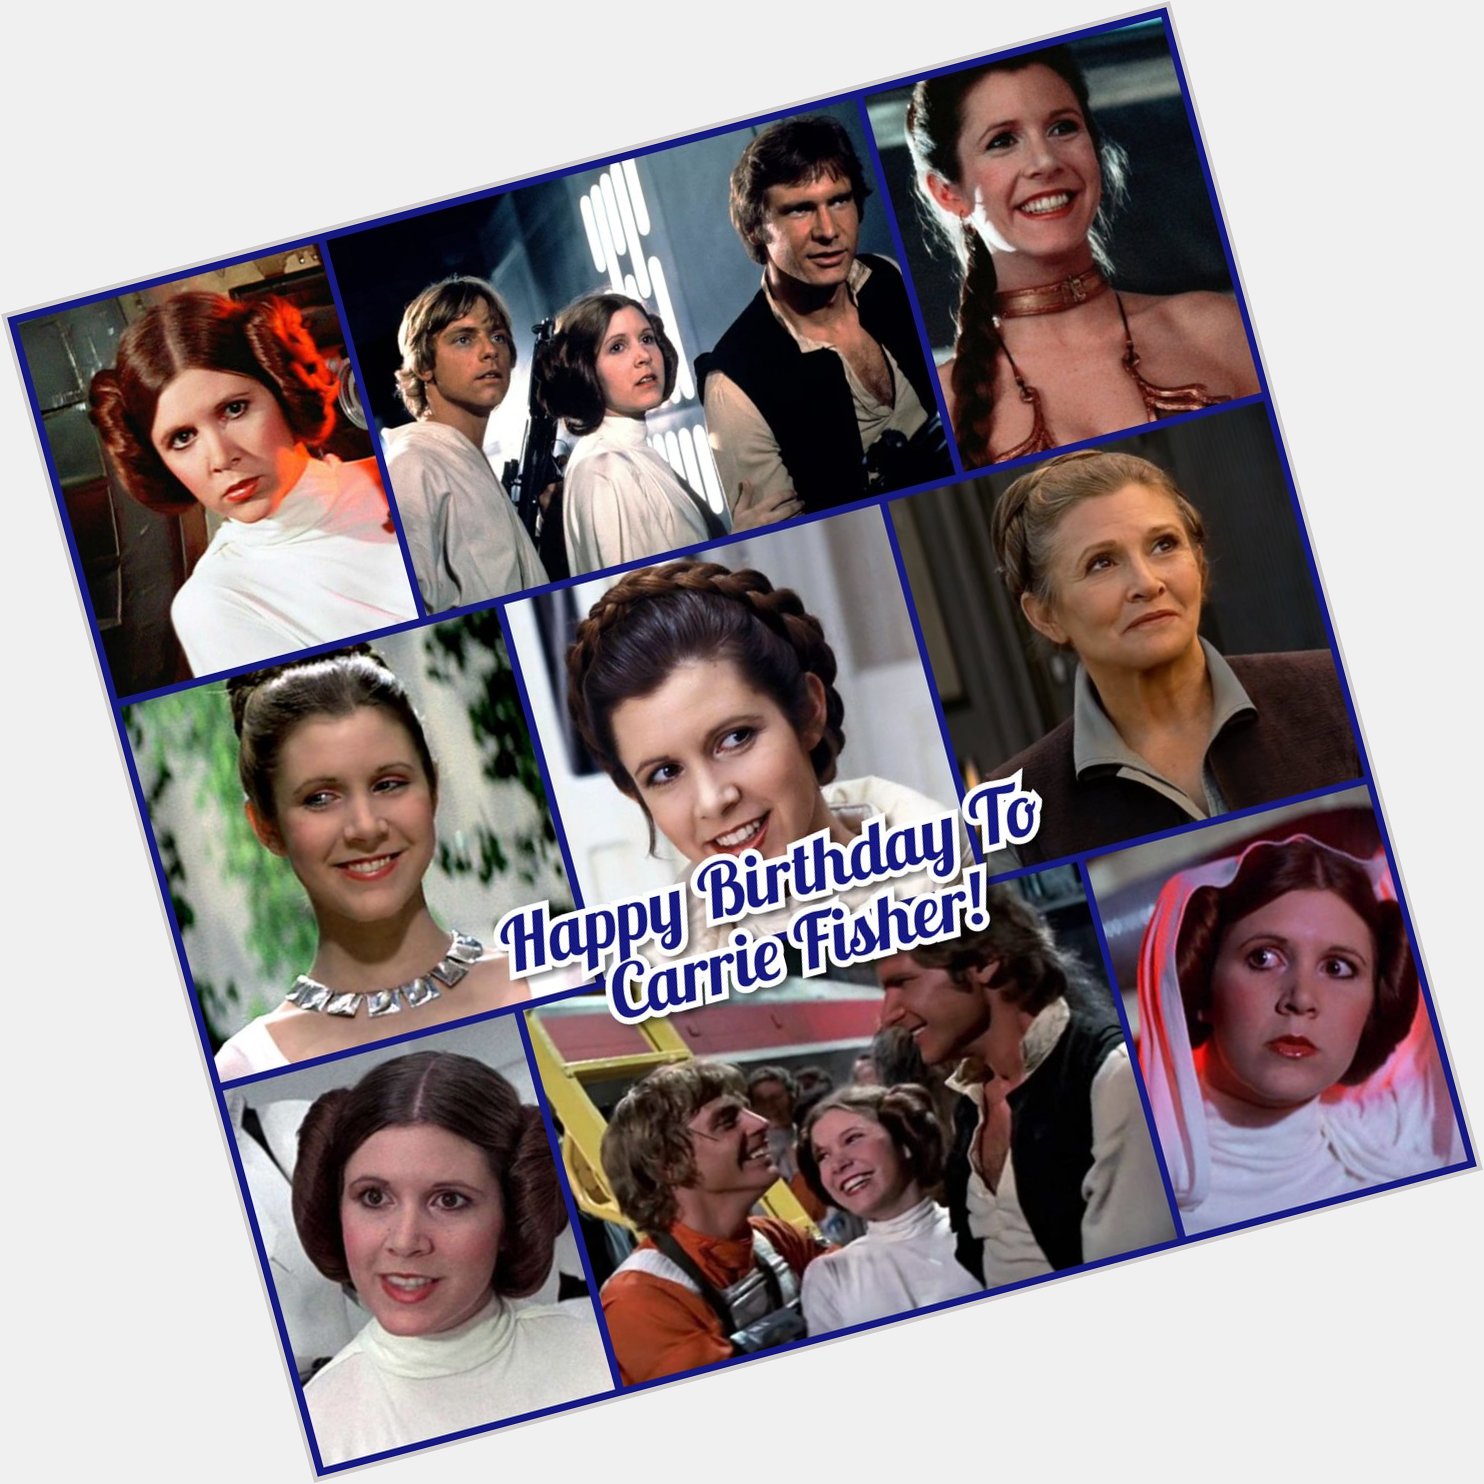 Happy Birthday To Carrie Fisher! 
She was a very good actress  